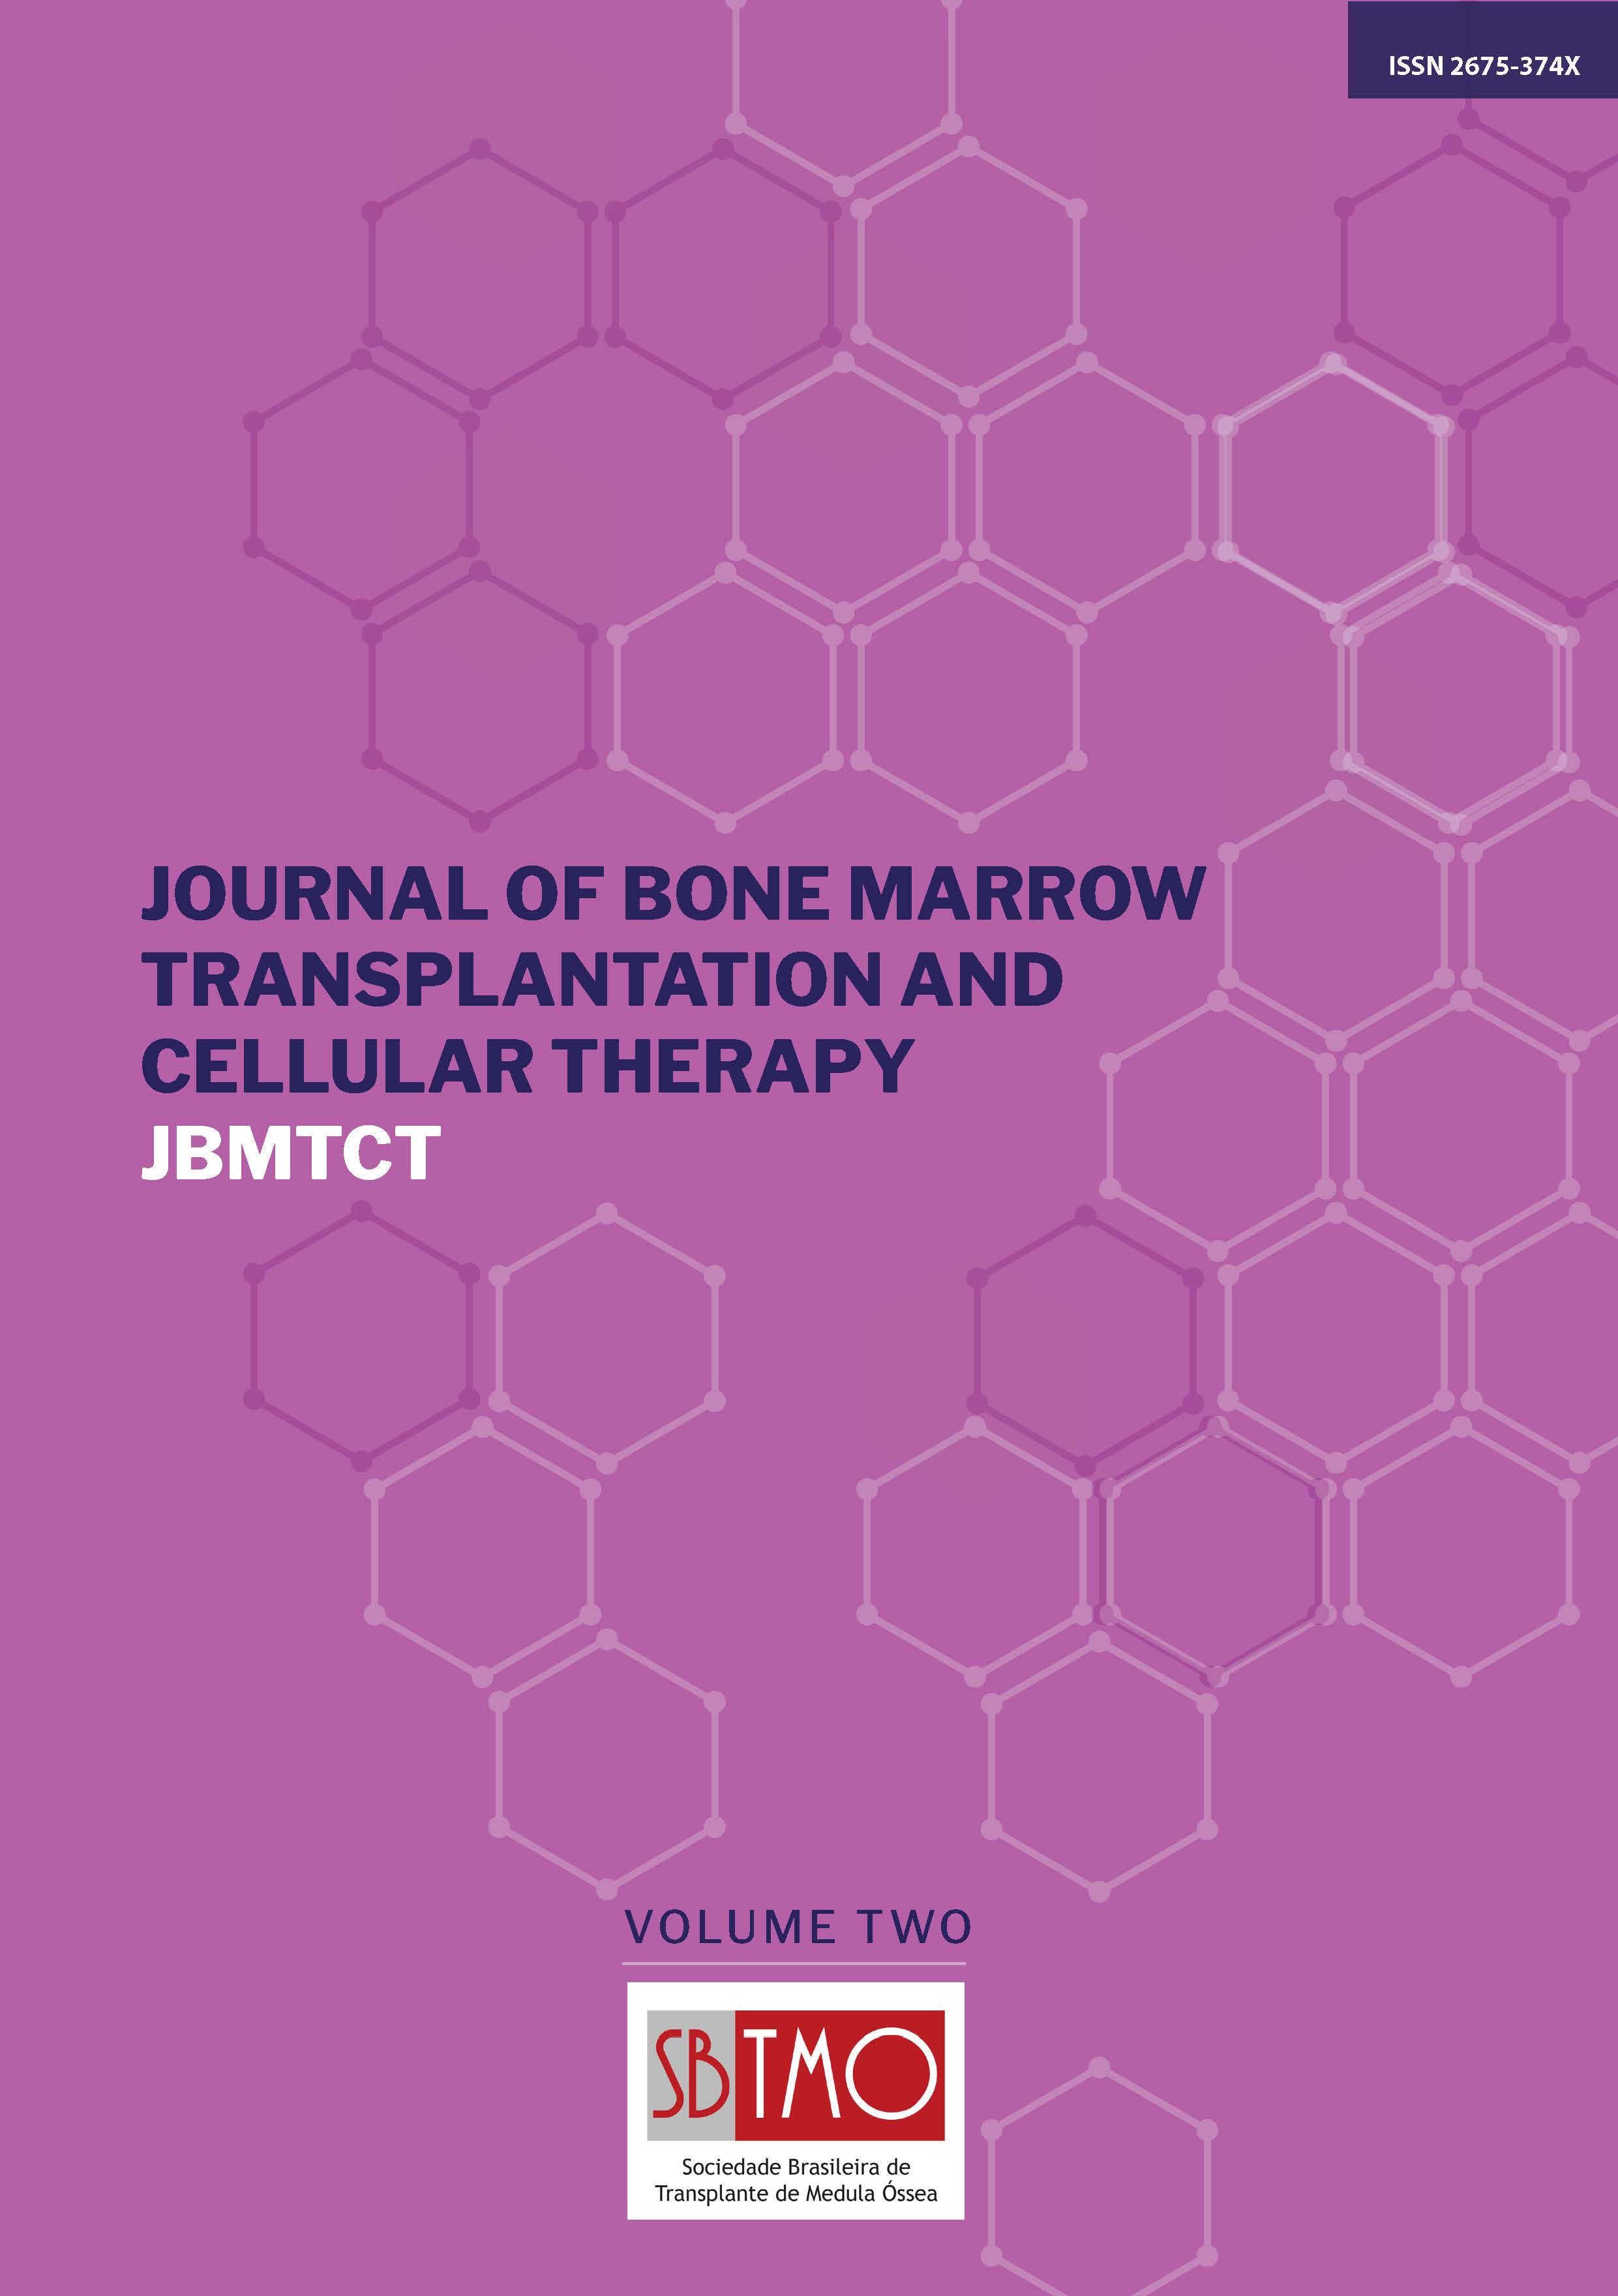 					View Vol. 1 No. 3 (2020): Journal of Bone Marrow Transplantation and Cellular Therapy
				